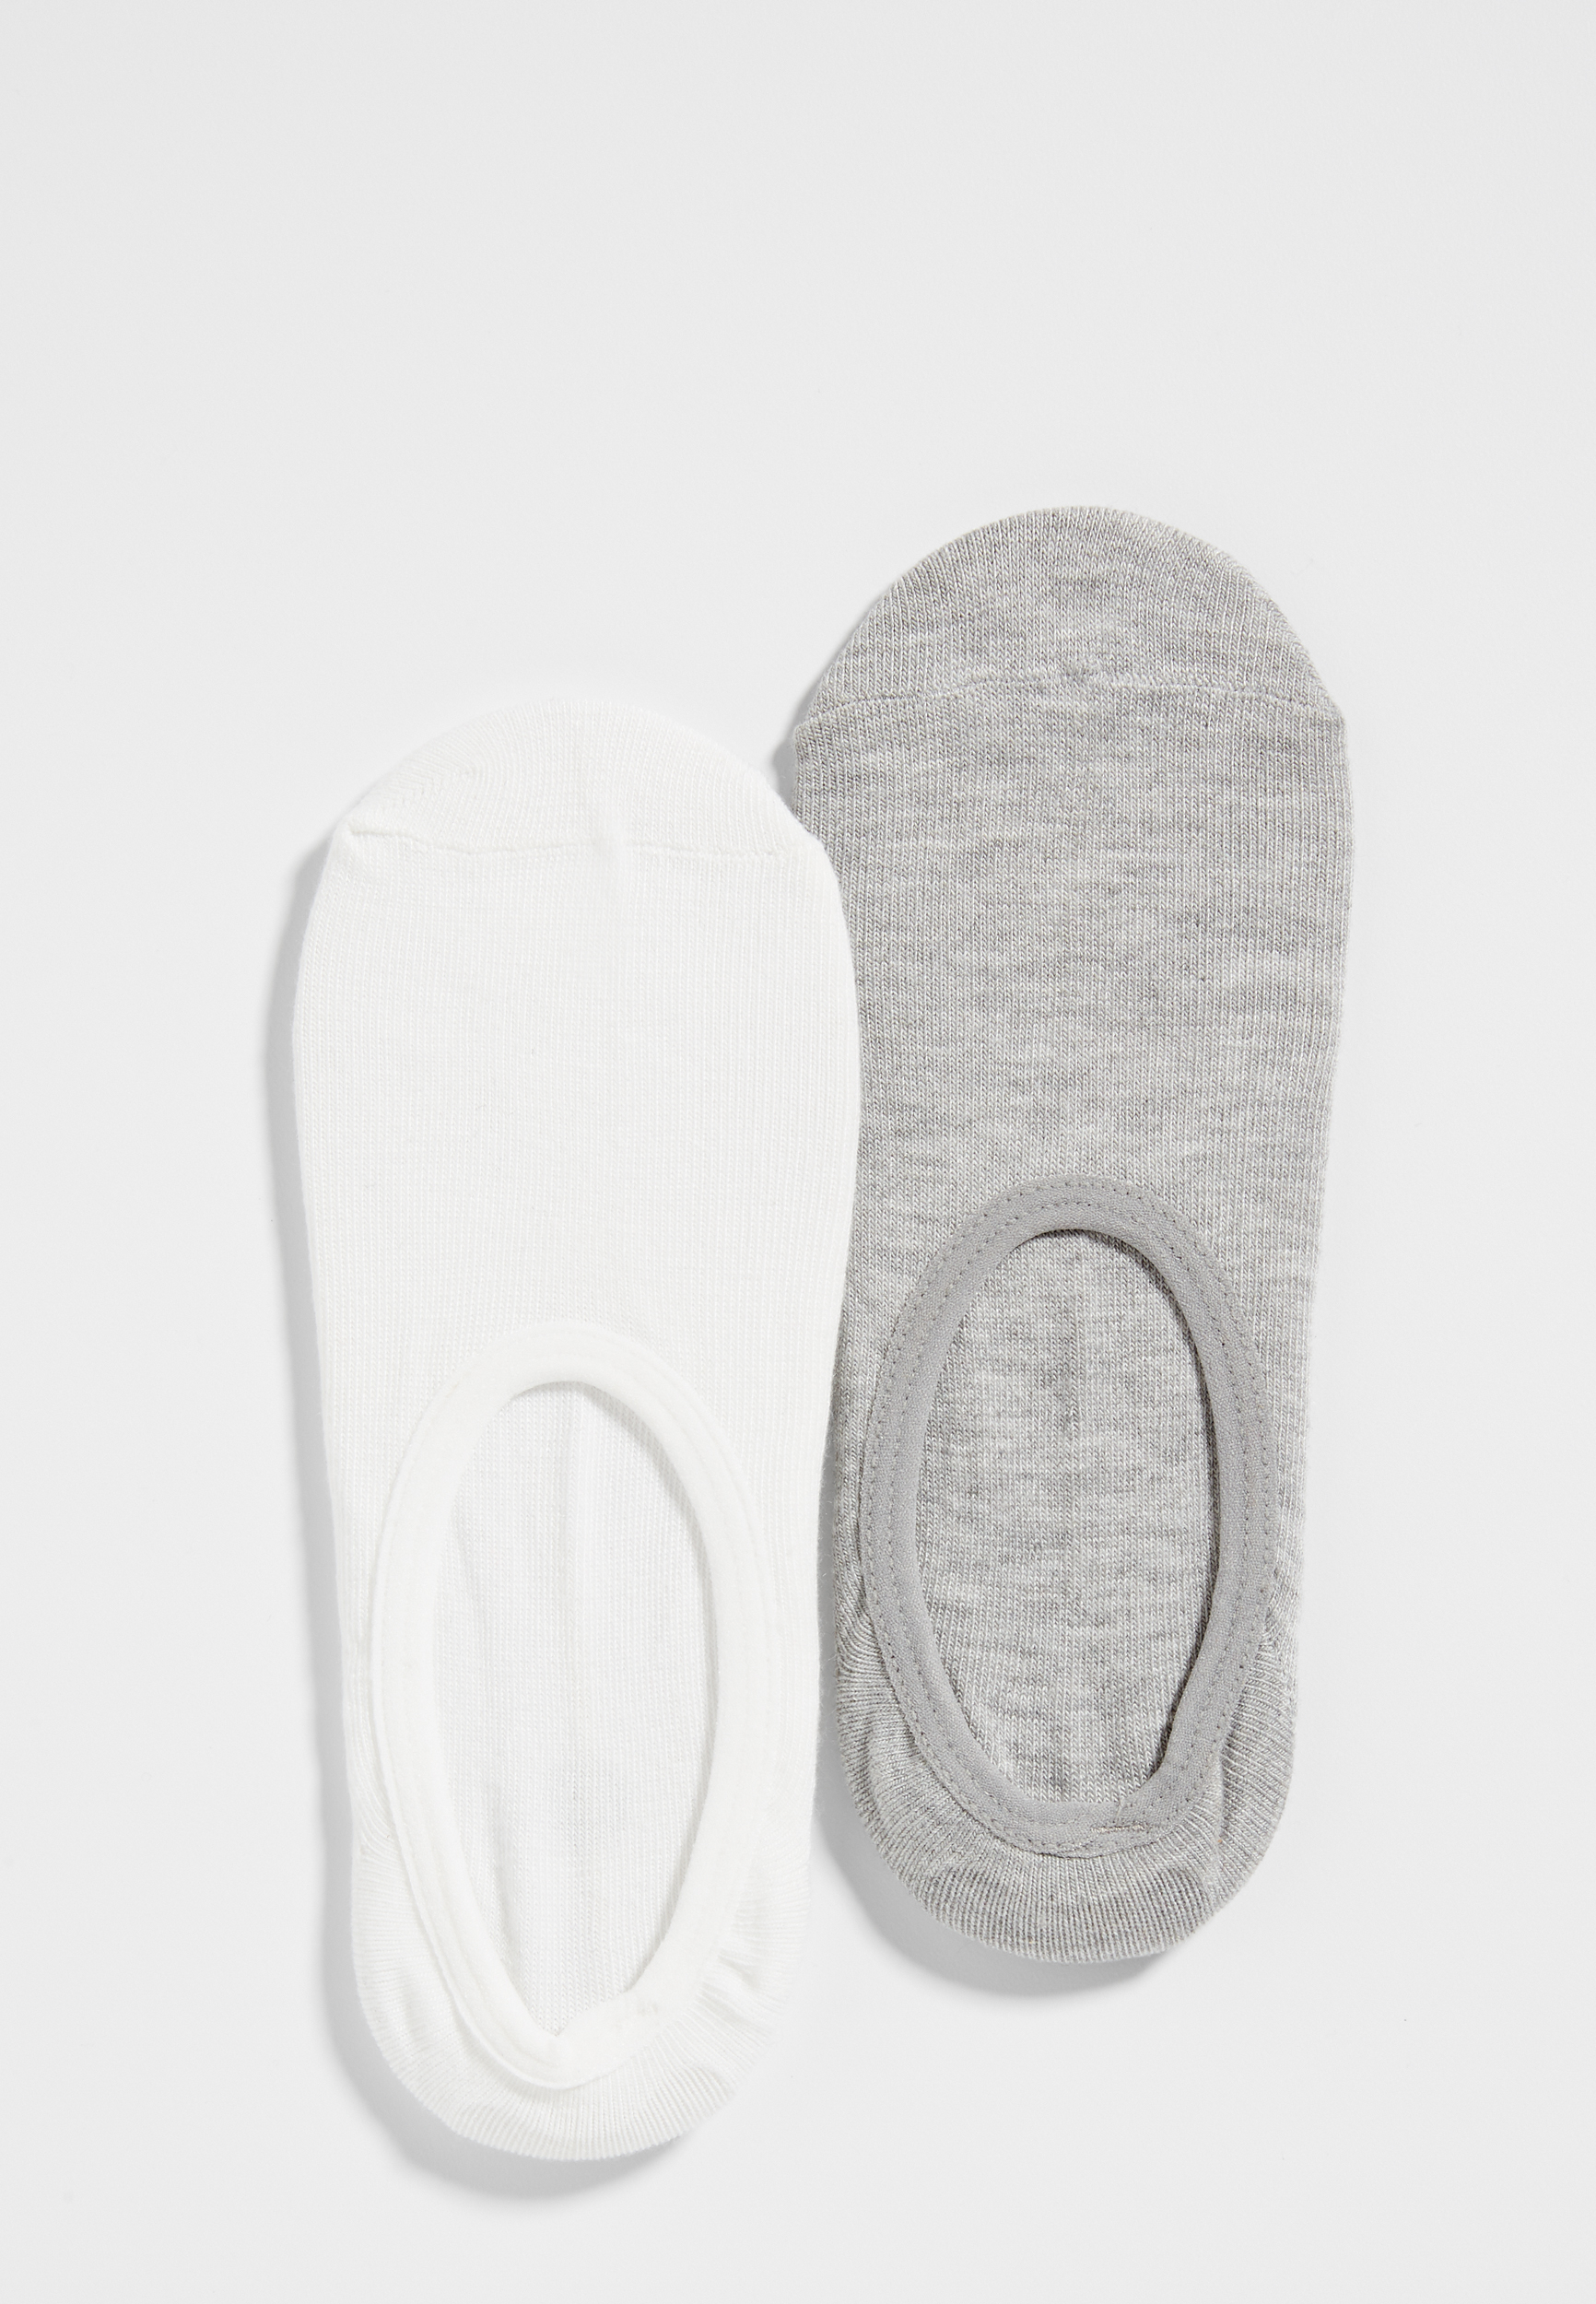 no-show socks with grips in gray and white - 2 pack | maurices